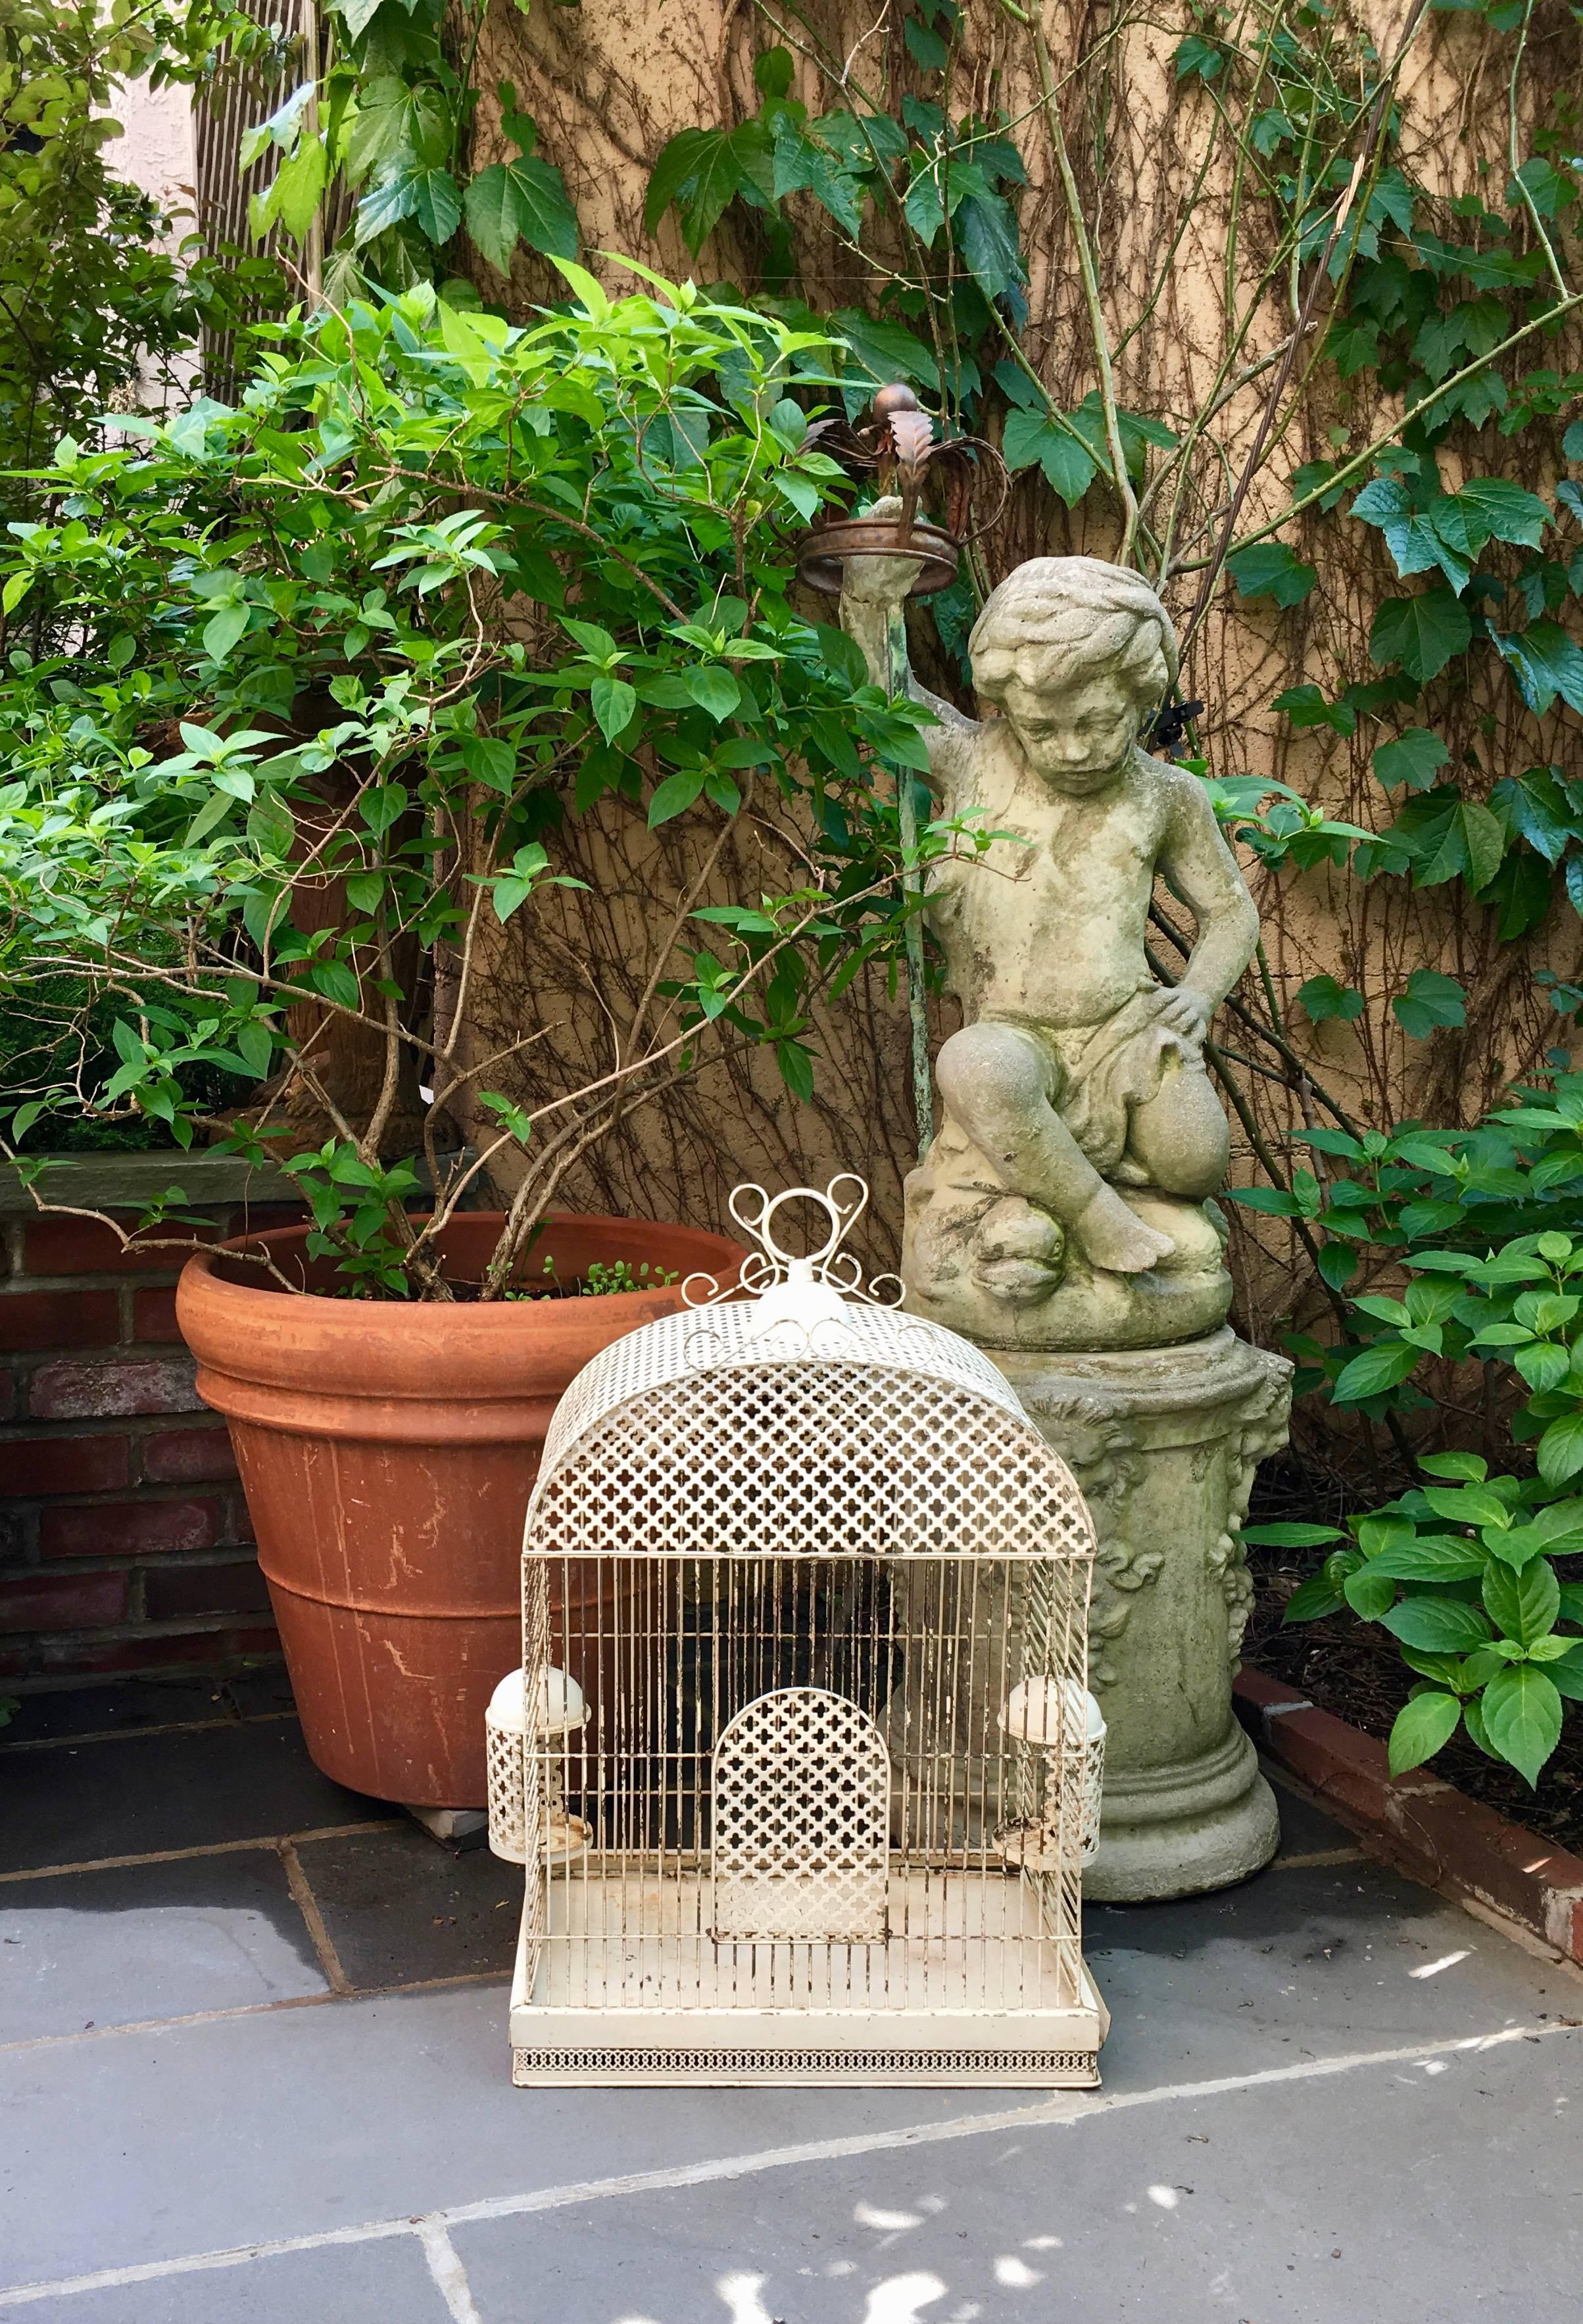 A charming, Belle Époque, French Tôle Peinte bird cage, circa 1871-1914. The creamy-white painted metal cage is large enough for a pair of love birds. 

The bottom tray slides out completely for cleaning and there are two feeders that swing out